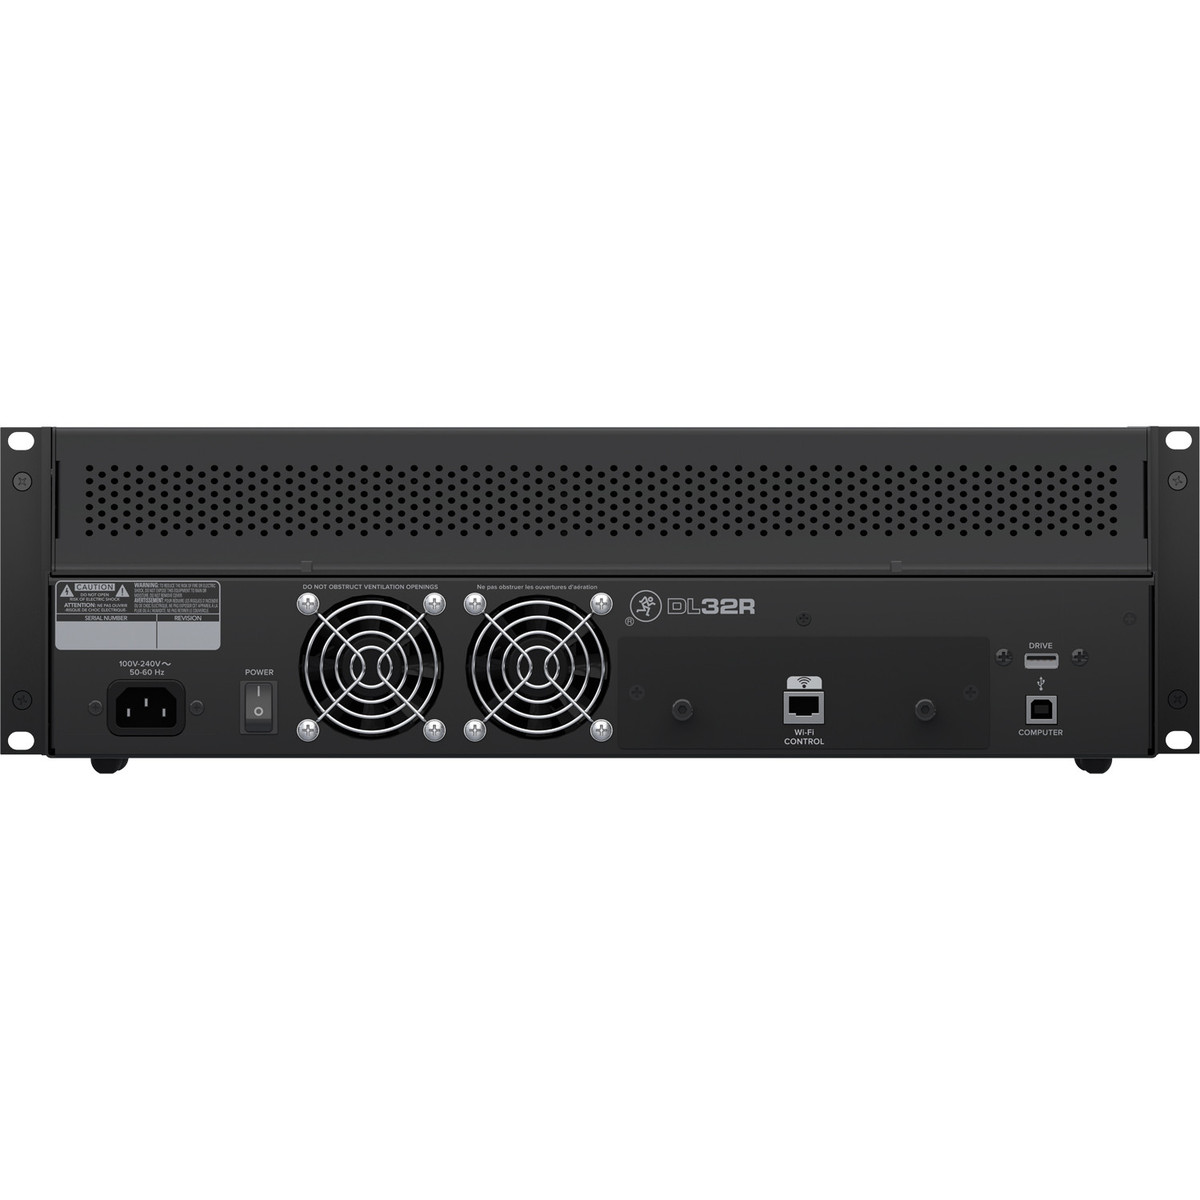 Mackie Dl32r Pour Ipad - Recorder in rack - Variation 3